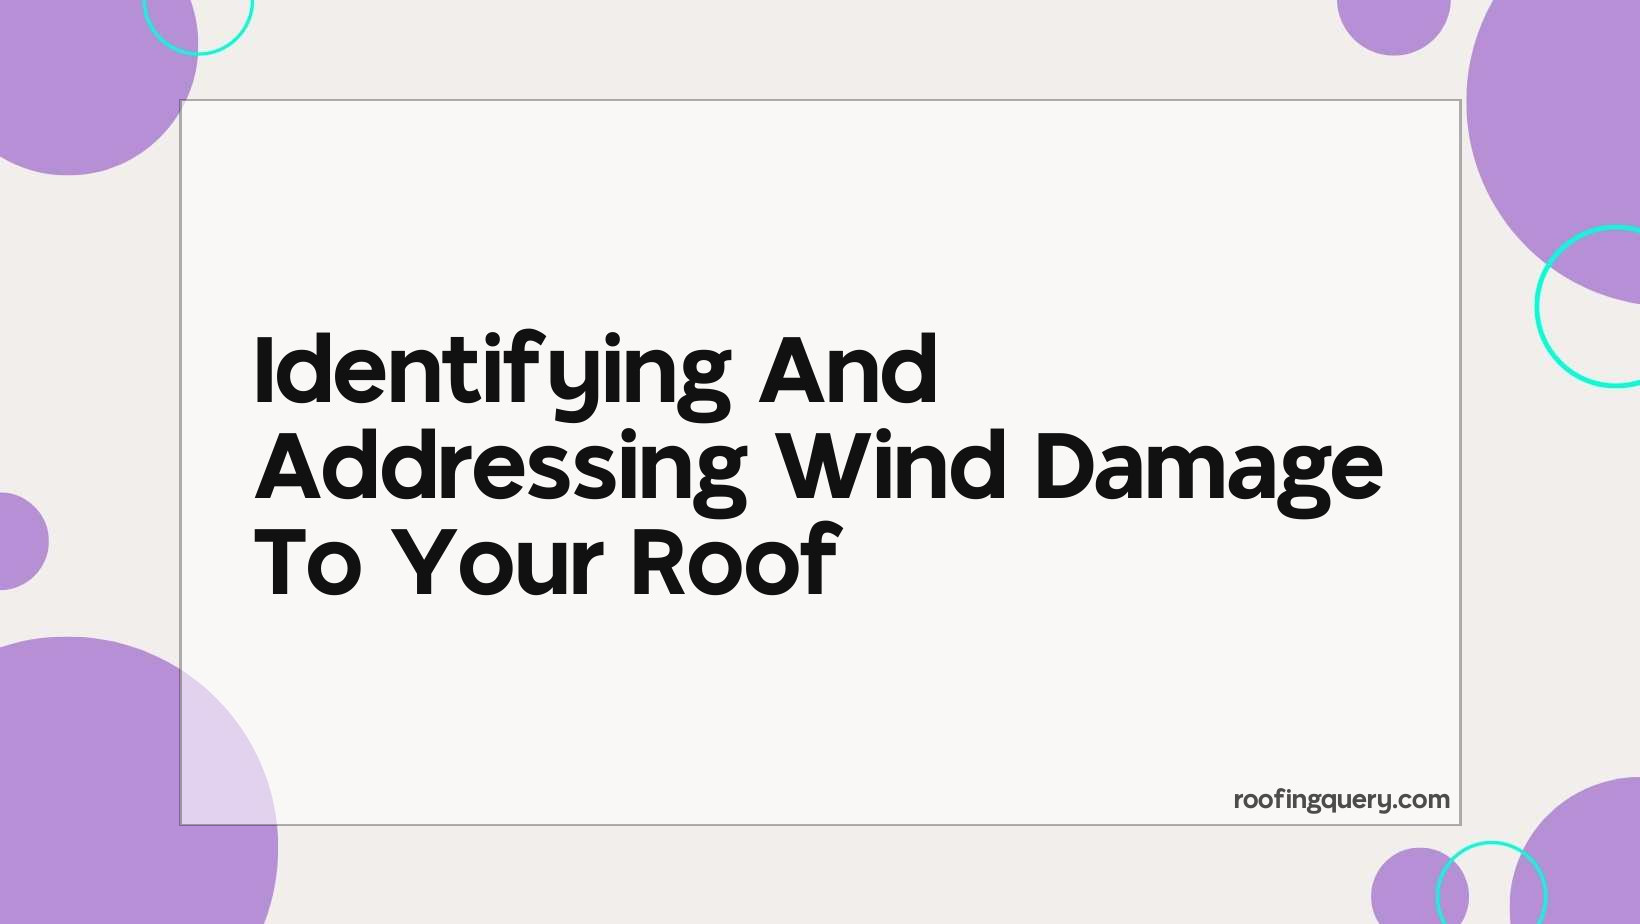 Identifying And Addressing Wind Damage To Your Roof